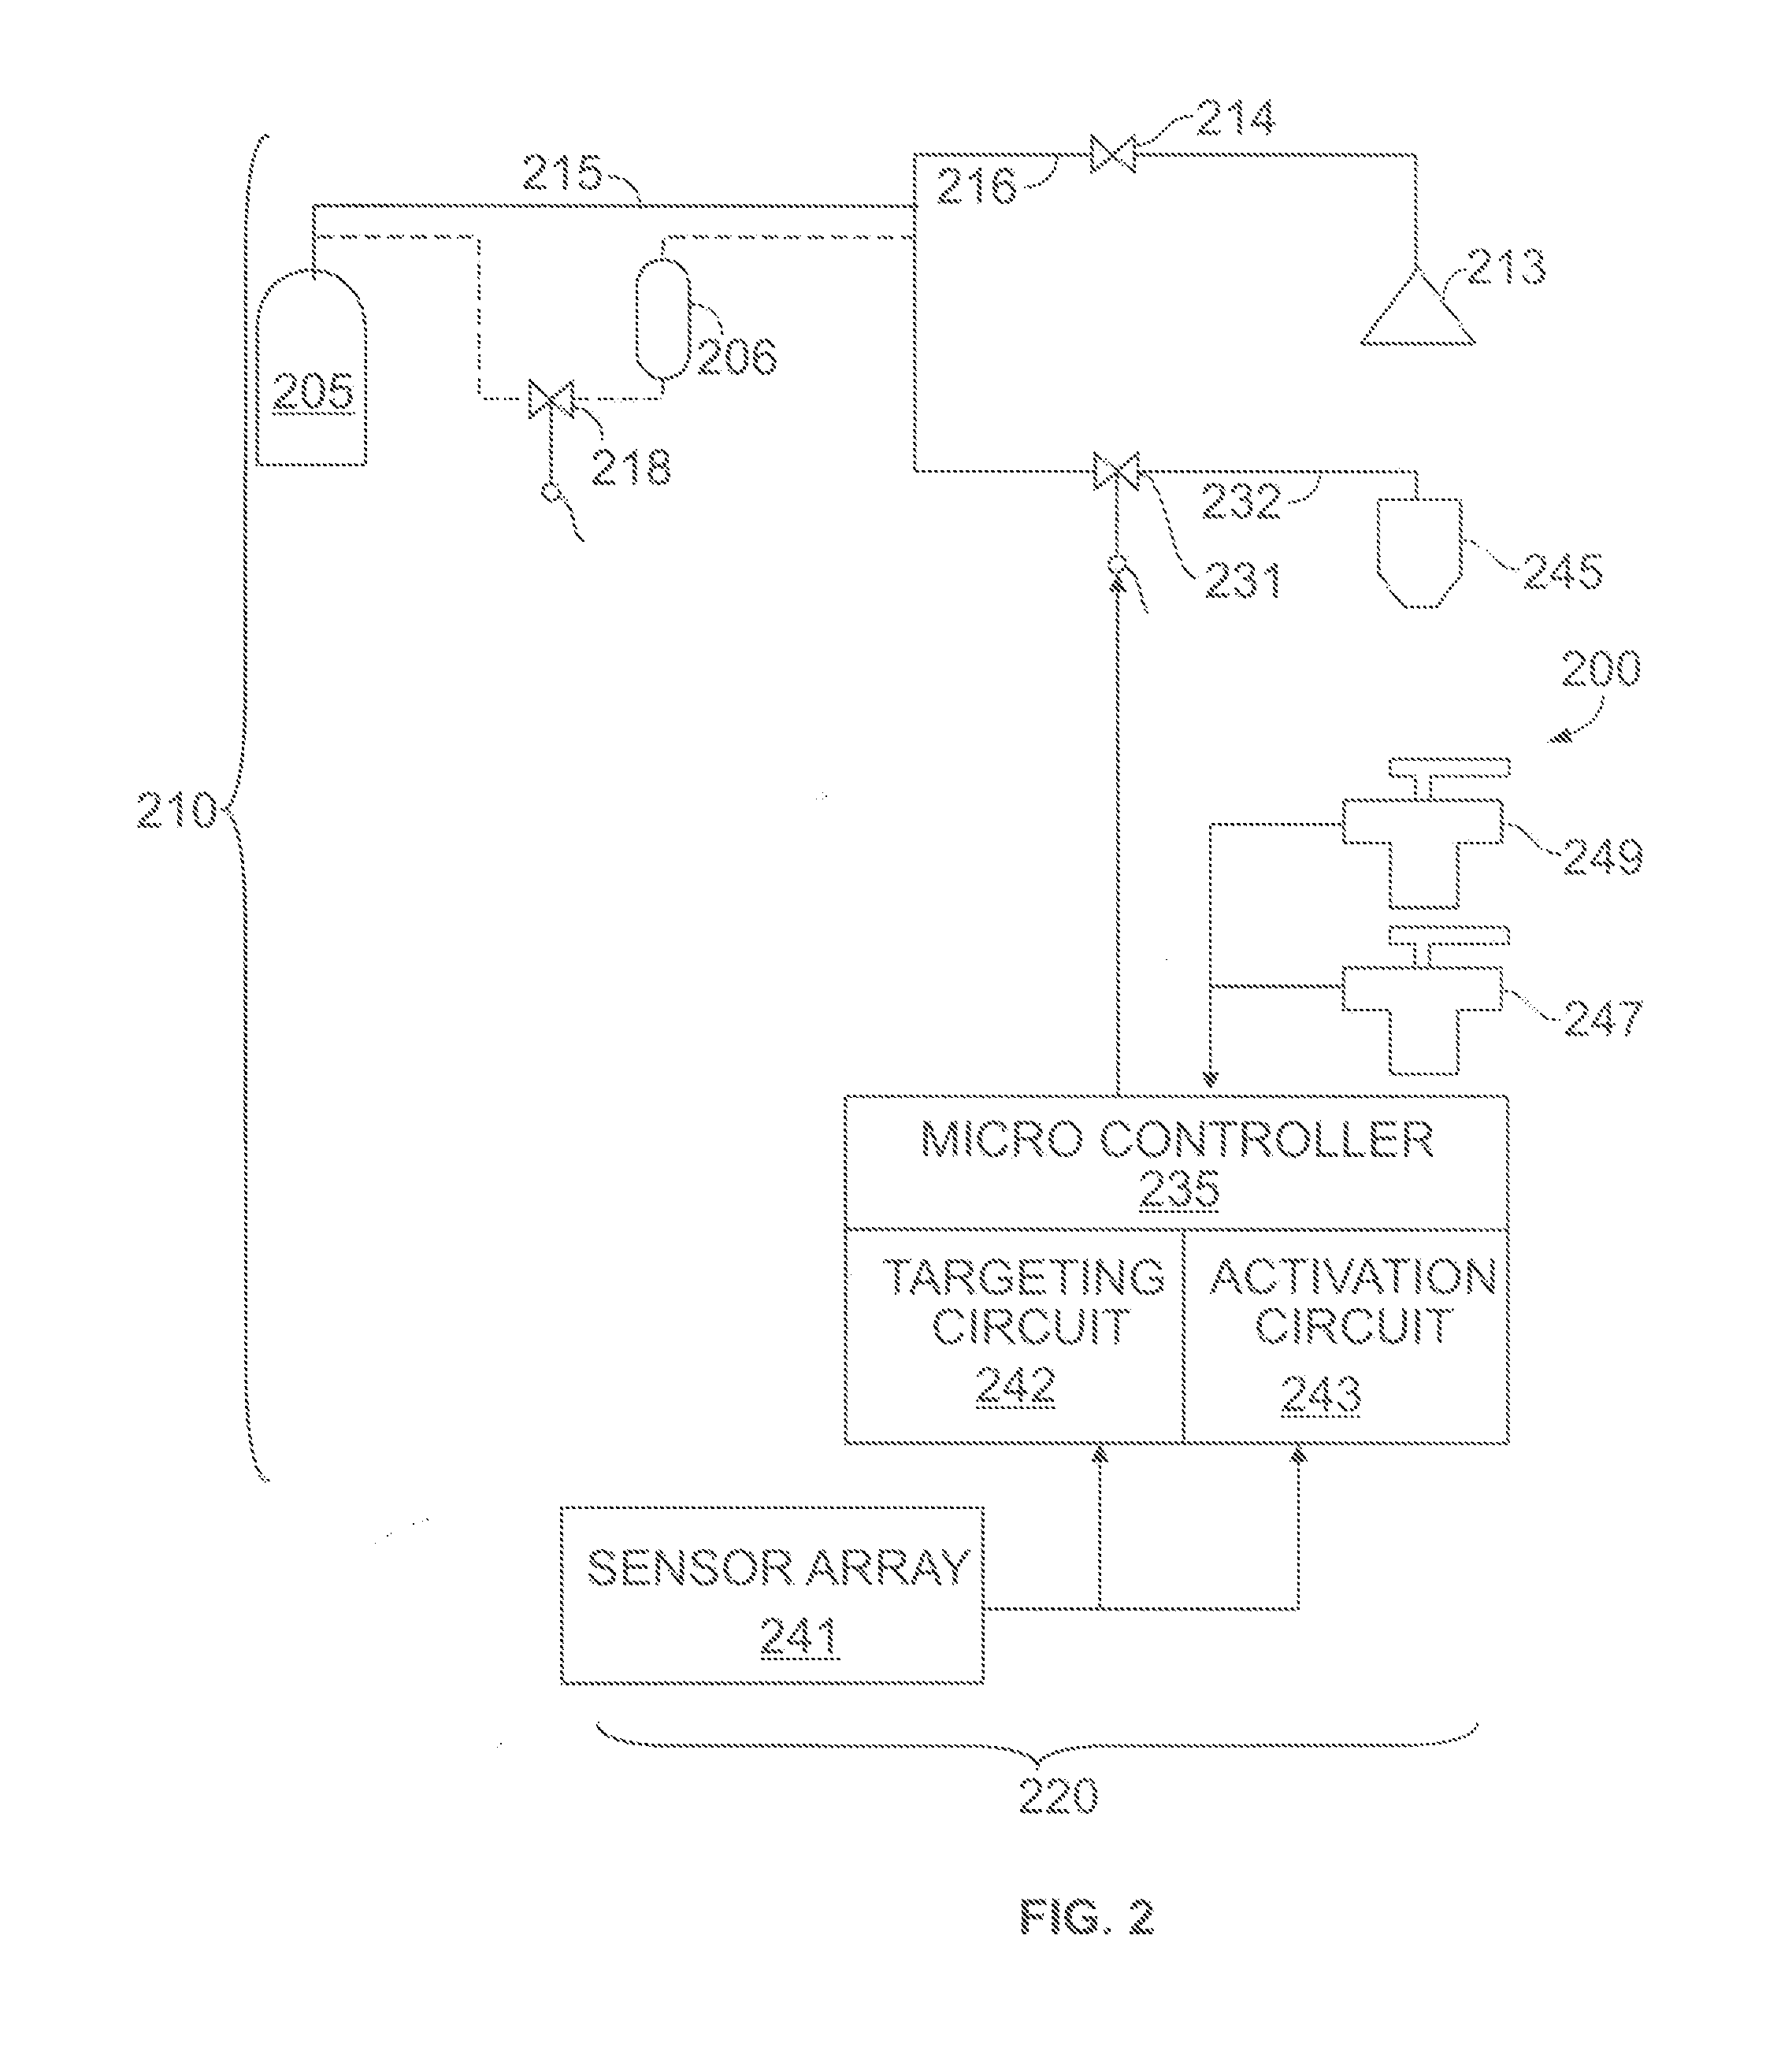 Automatic fire targeting and extinguishing system and method